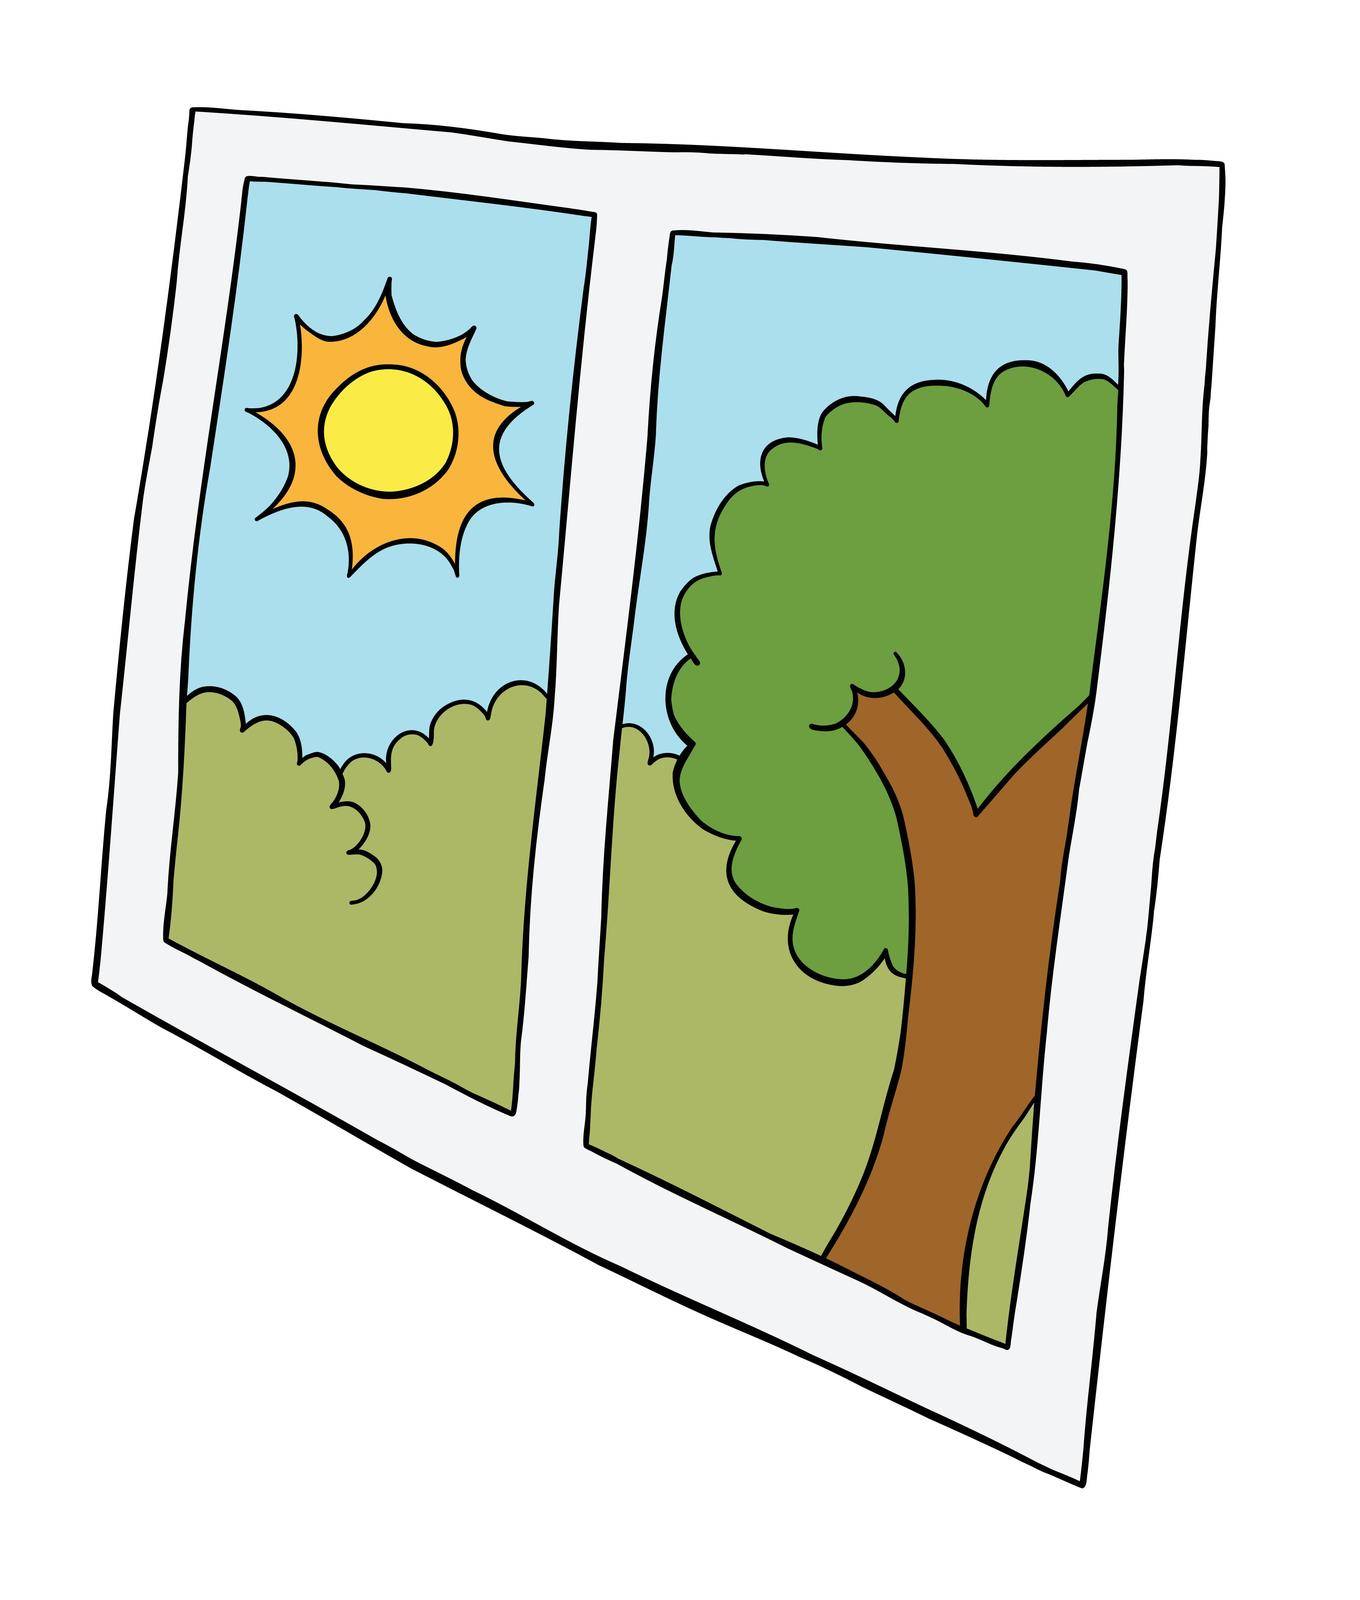 Cartoon vector illustration of window and day, sun and tree by emrahavci